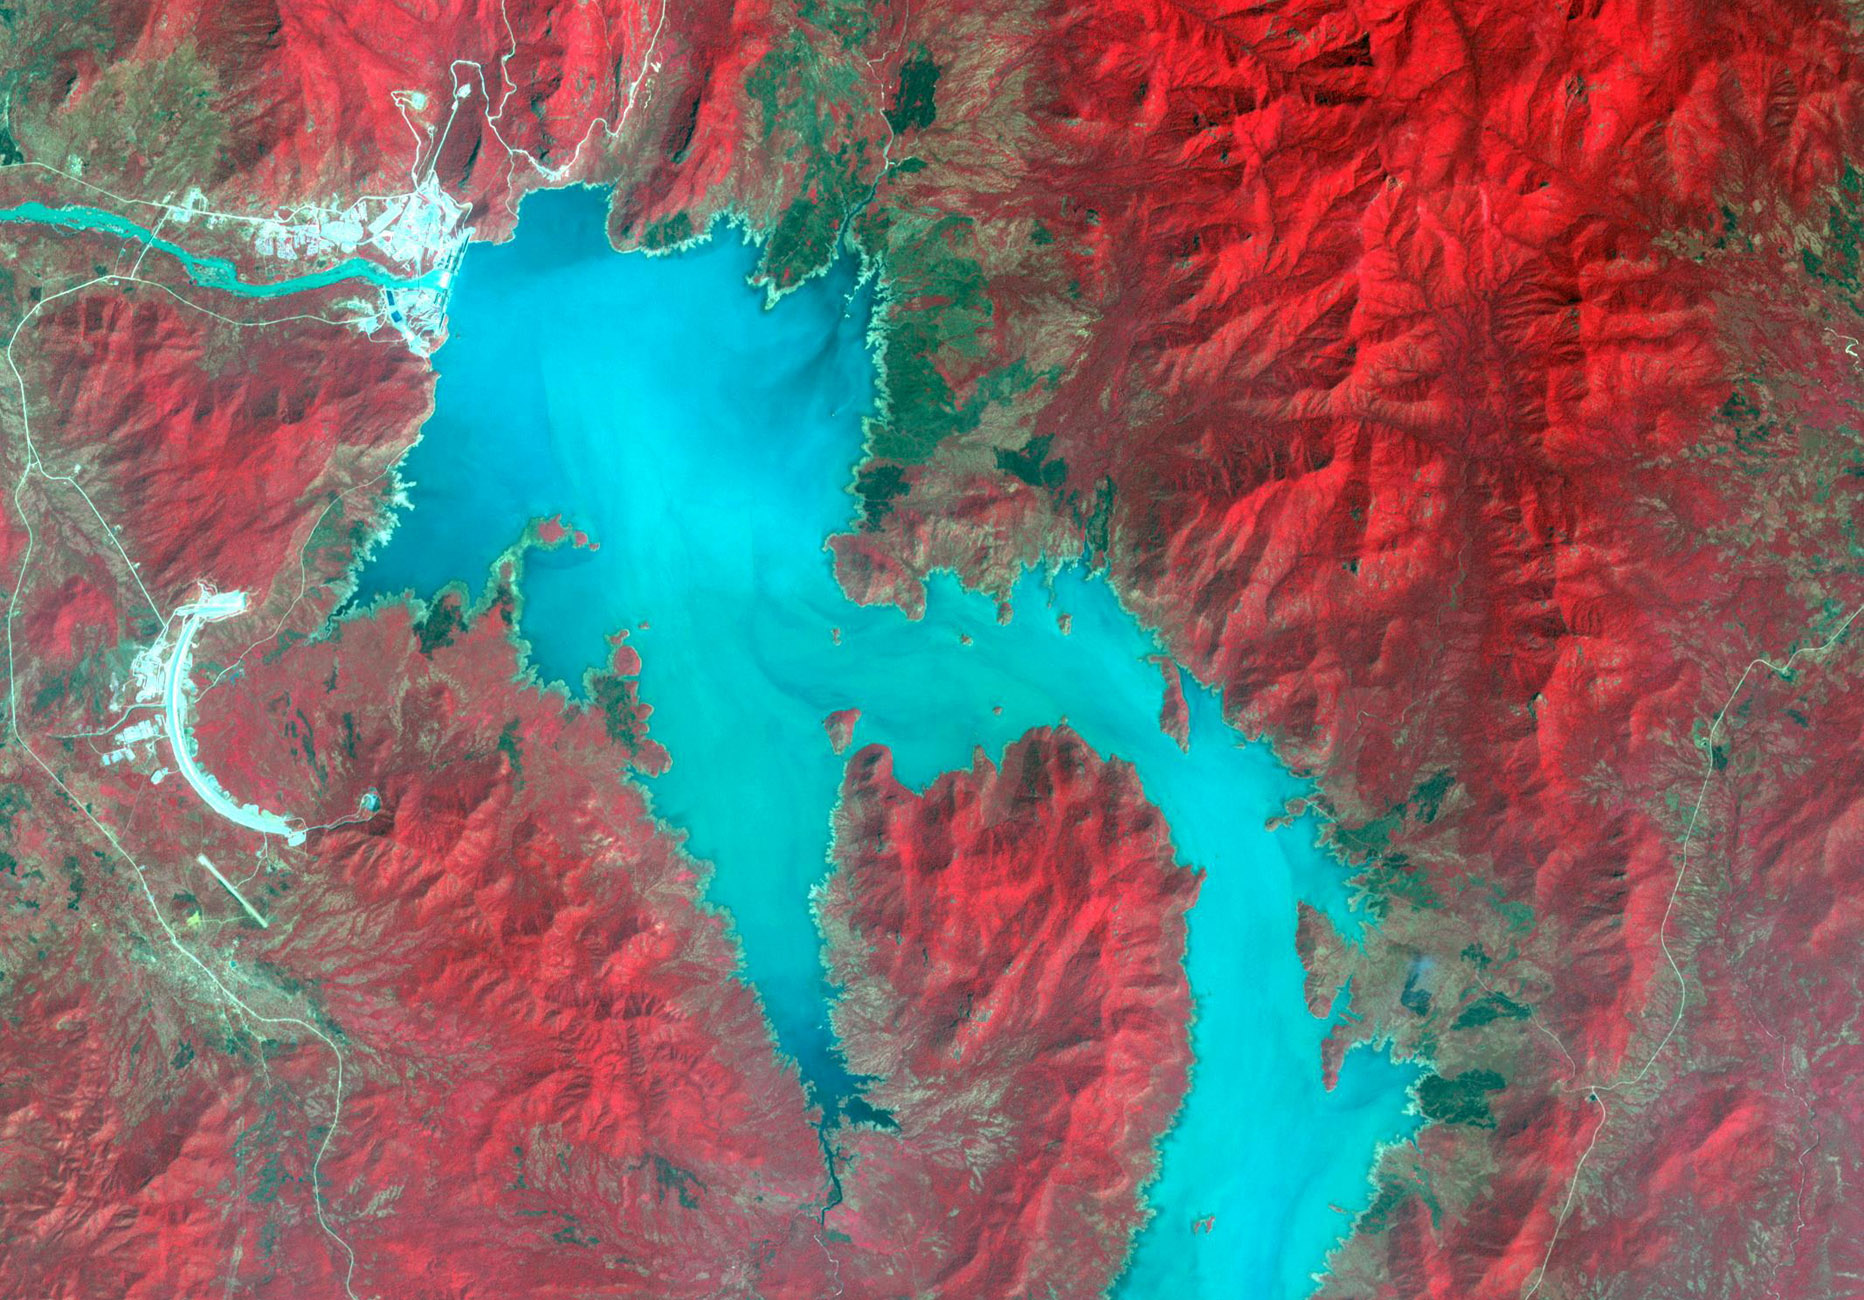 FILE PHOTO: The Blue Nile River is seen as the Grand Ethiopian Renaissance Dam reservoir fills near the Ethiopia-Sudan border, in this broad spectral image taken November 6, 2020. NASA/METI/AIST/Japan Space Systems, and U.S./Japan ASTER Science Team/Handout via REUTERS THIS IMAGE HAS BEEN SUPPLIED BY A THIRD PARTY/File Photo